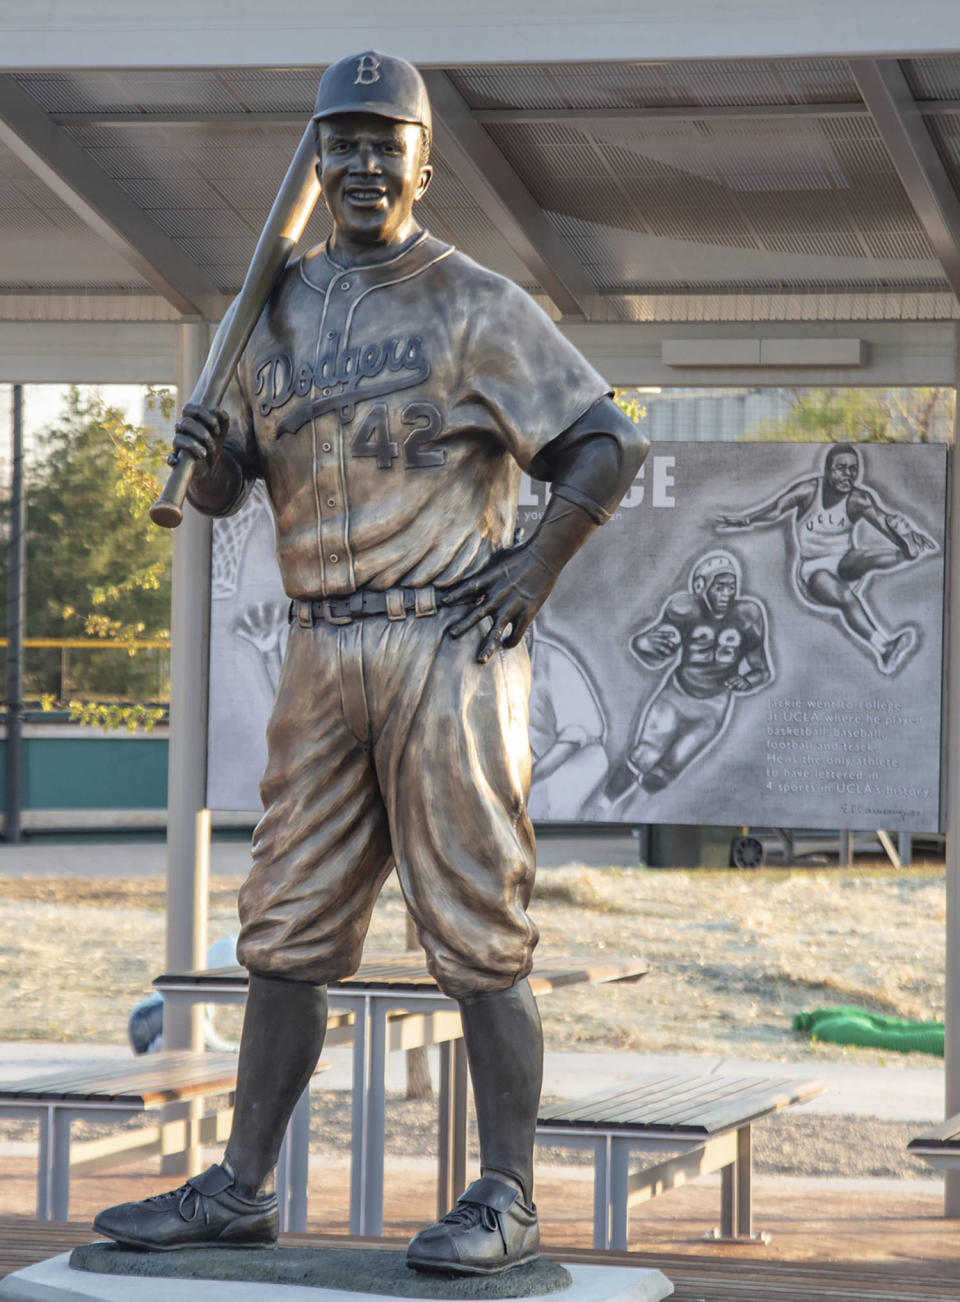 The statue of Jackie Robinson before it was cut down in Wichita, Kan. (Mel Gregory / AP file)